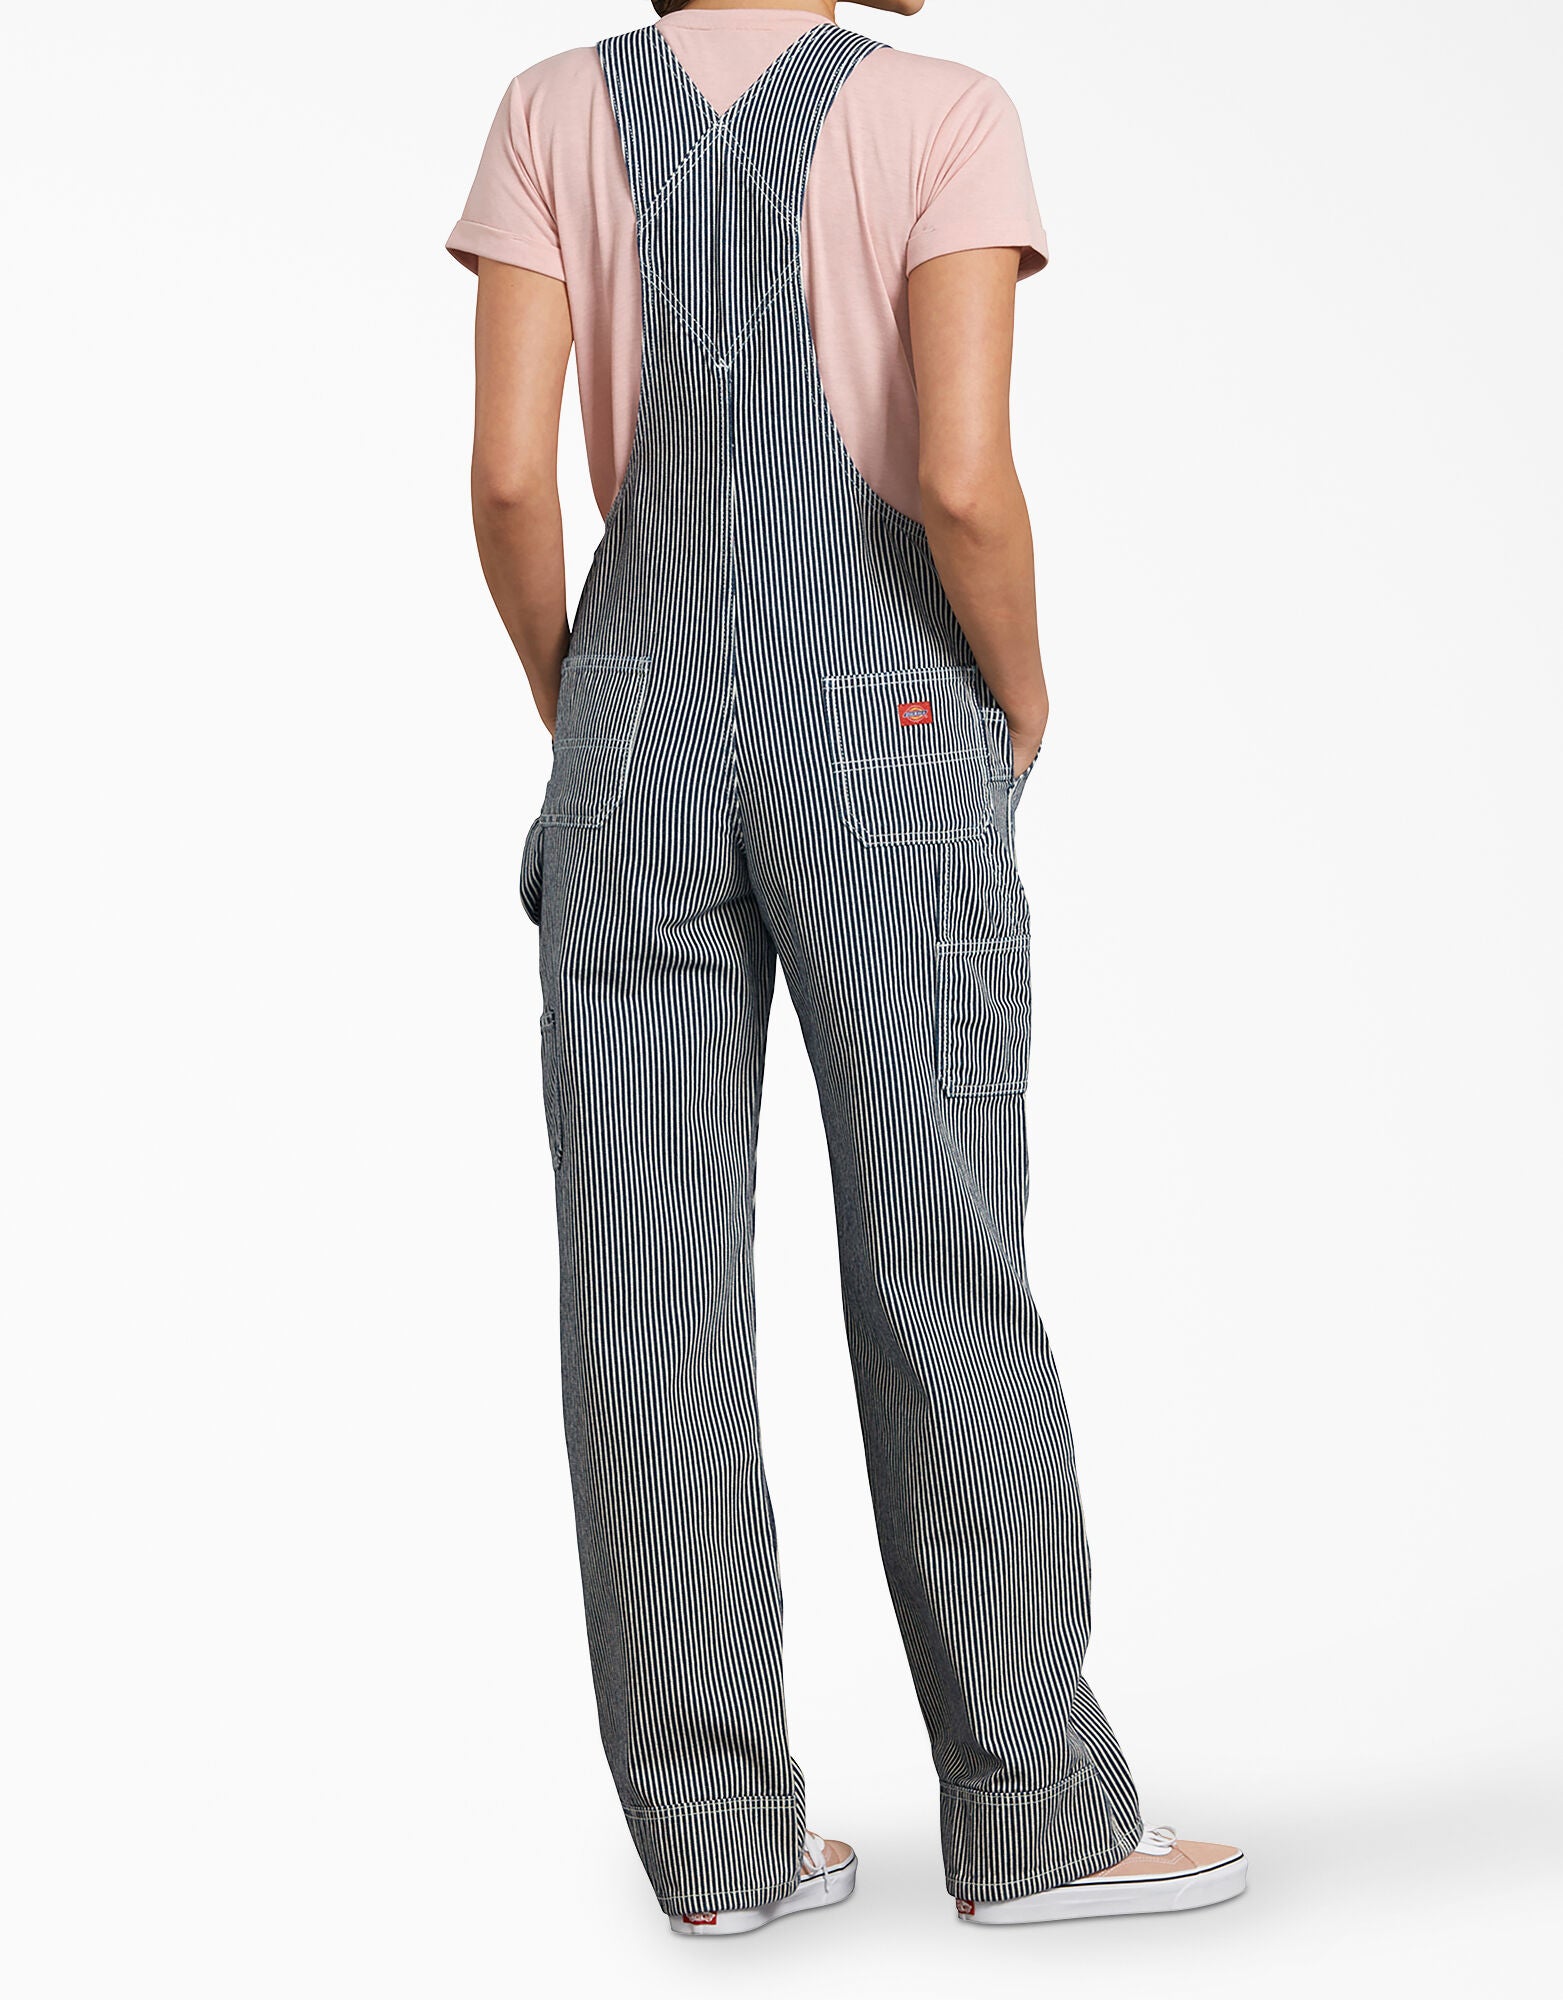 DICKIES WOMENS RELAXED FIT BIB OVERALLS